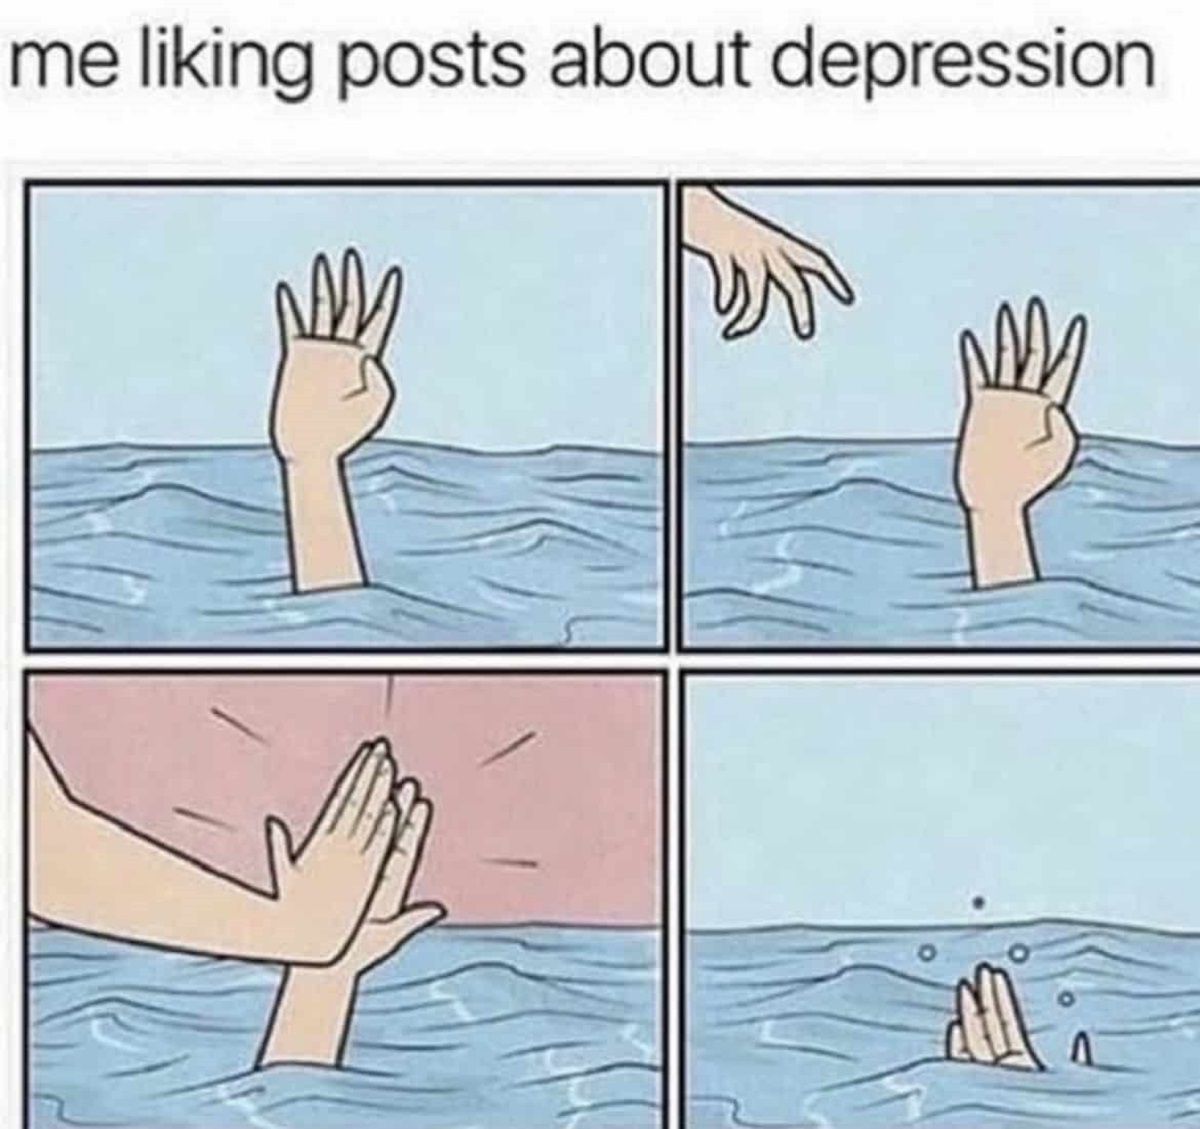 let me know how i can help vc - me liking posts about depression